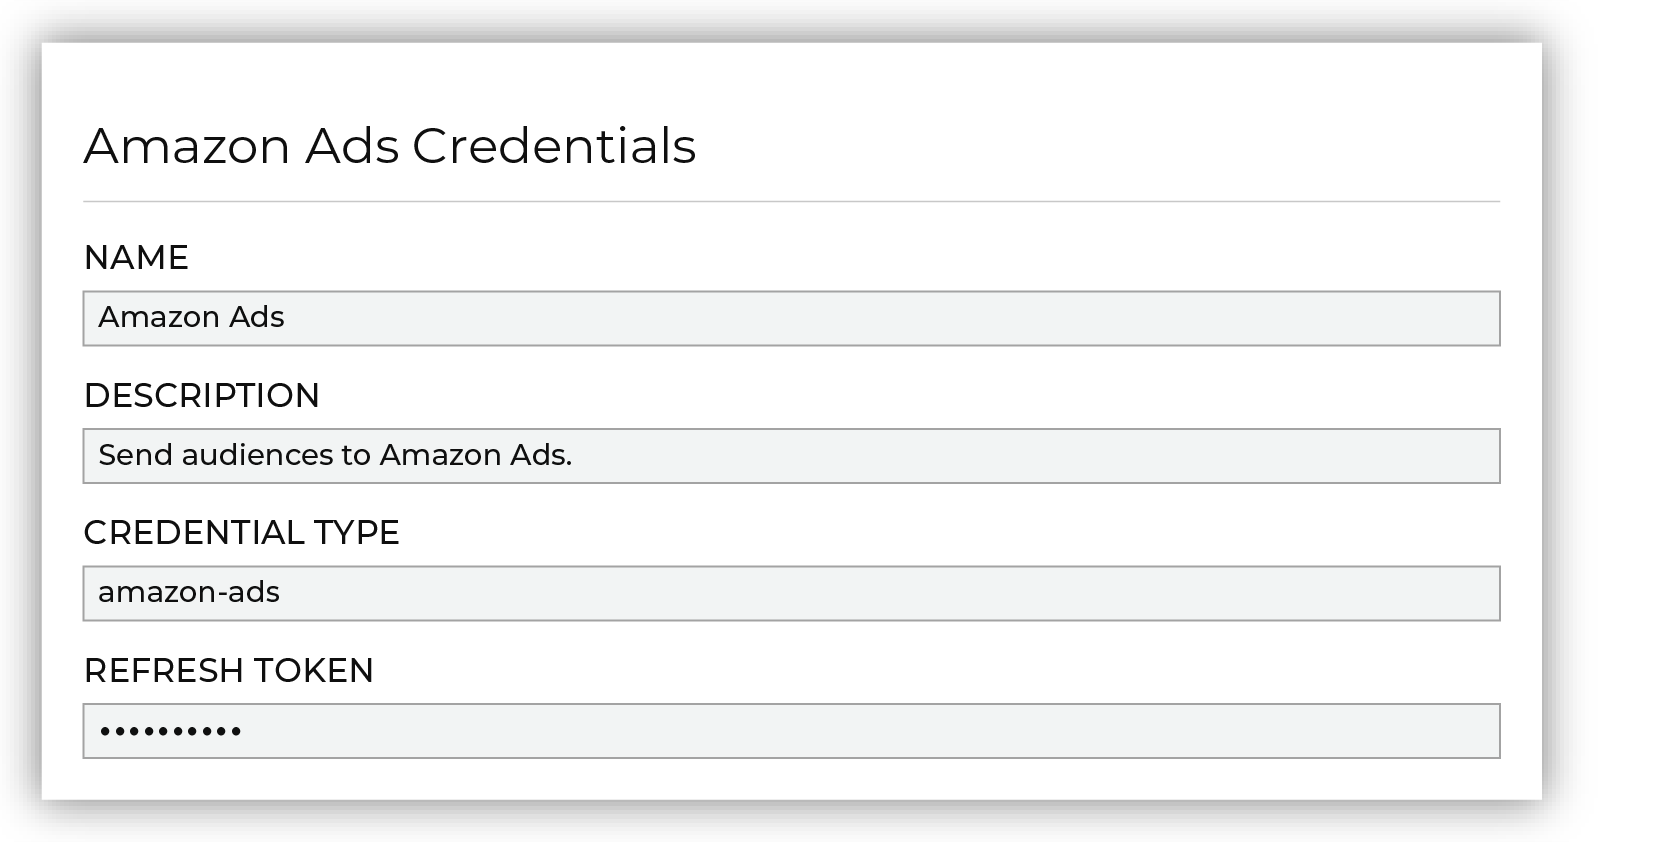 Set the following credentials for Amazon Ads.